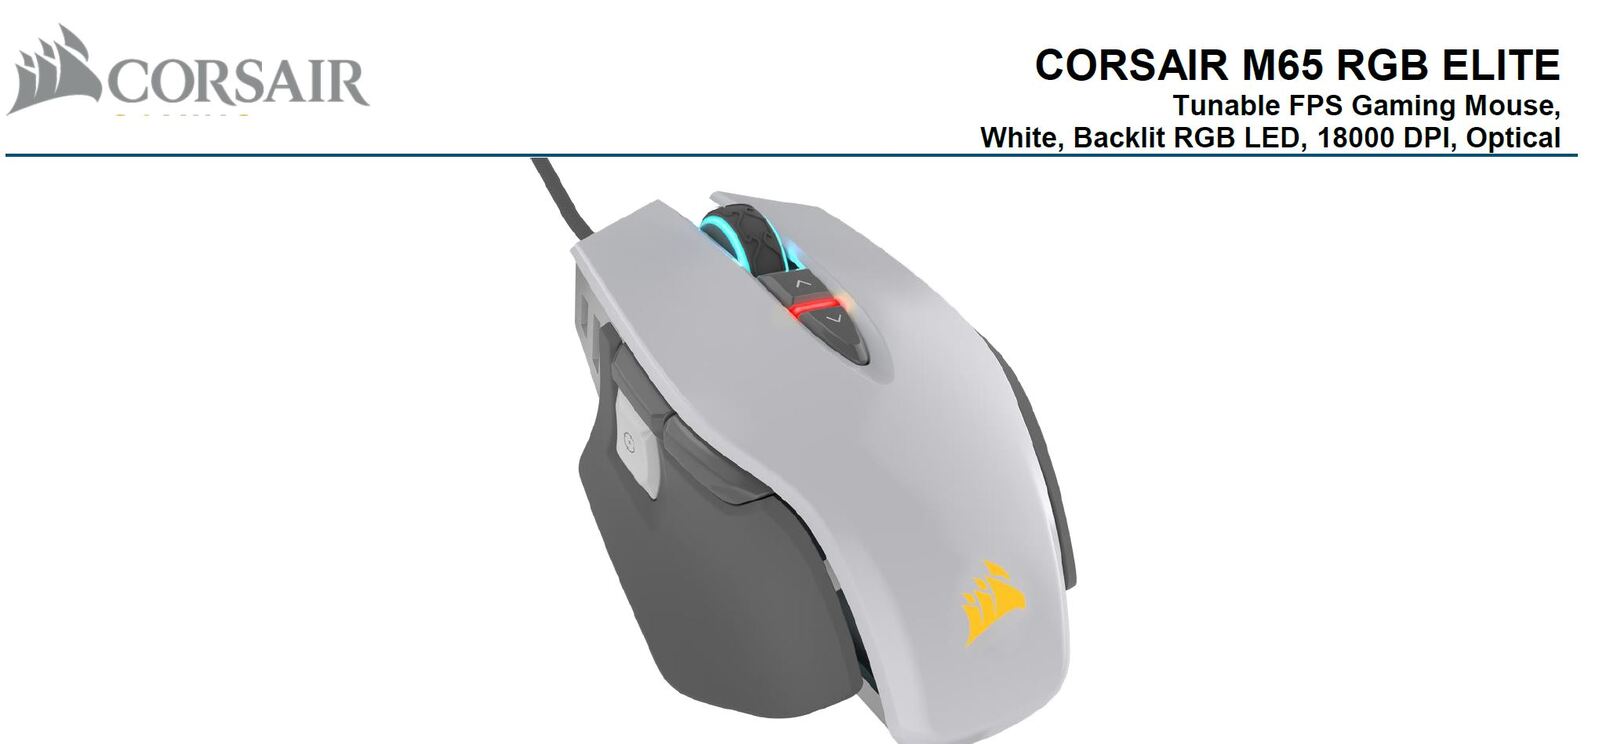 Corsair M65 RGB ELITE Tunable FPS Gaming Mouse White with Black, 18000 DPI, Optical, iCUE Software.